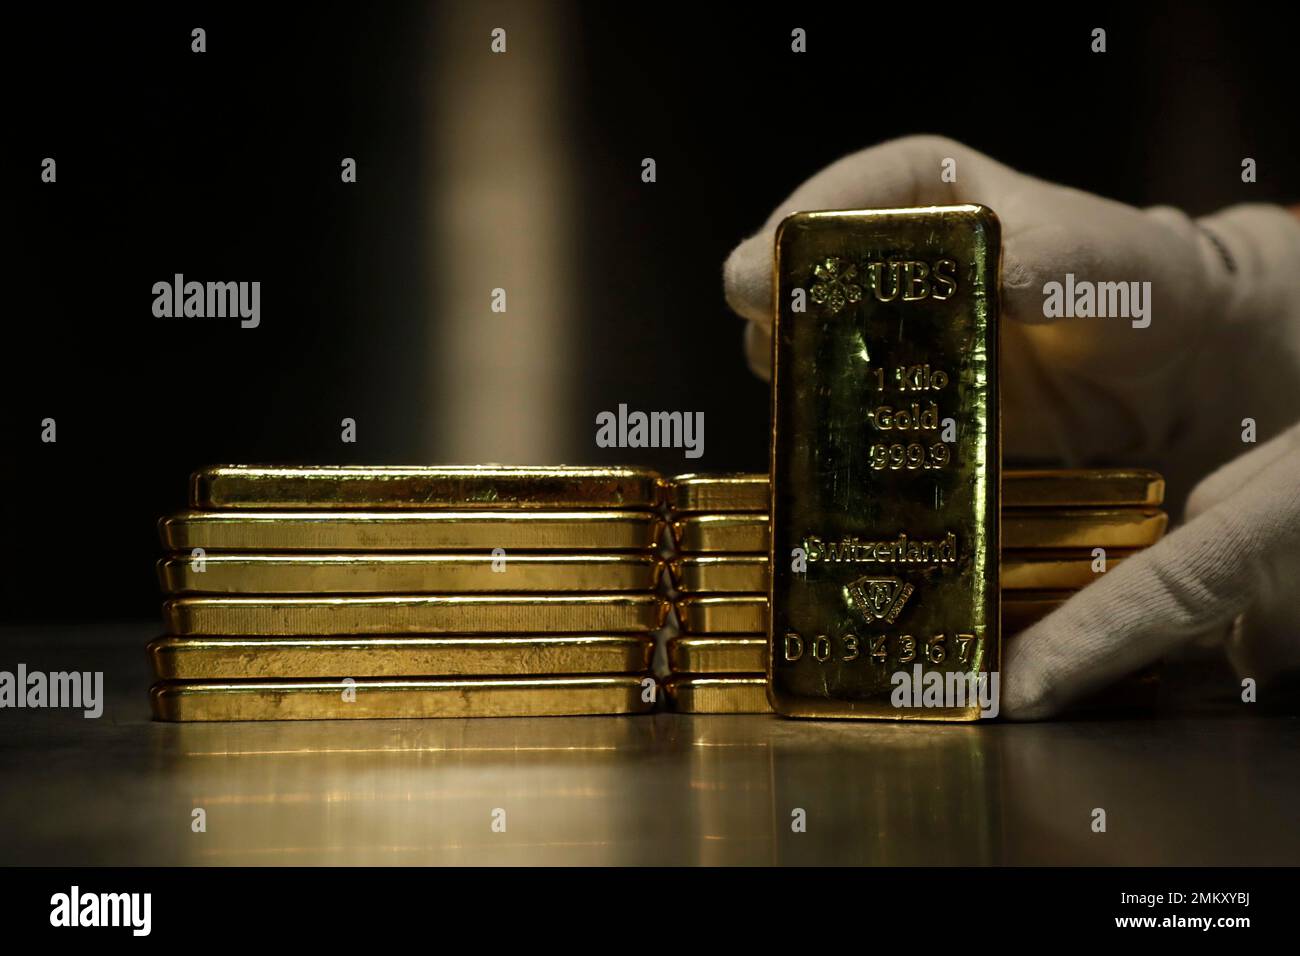 Employees of ProAurum gold house prepares 1 Kg gold bars of 999.9 purity in  the safe deposit boxes room in Munich, Germany, Thursday, Dec. 13, 2018.  (AP Photo/Matthias Schrader Stock Photo - Alamy